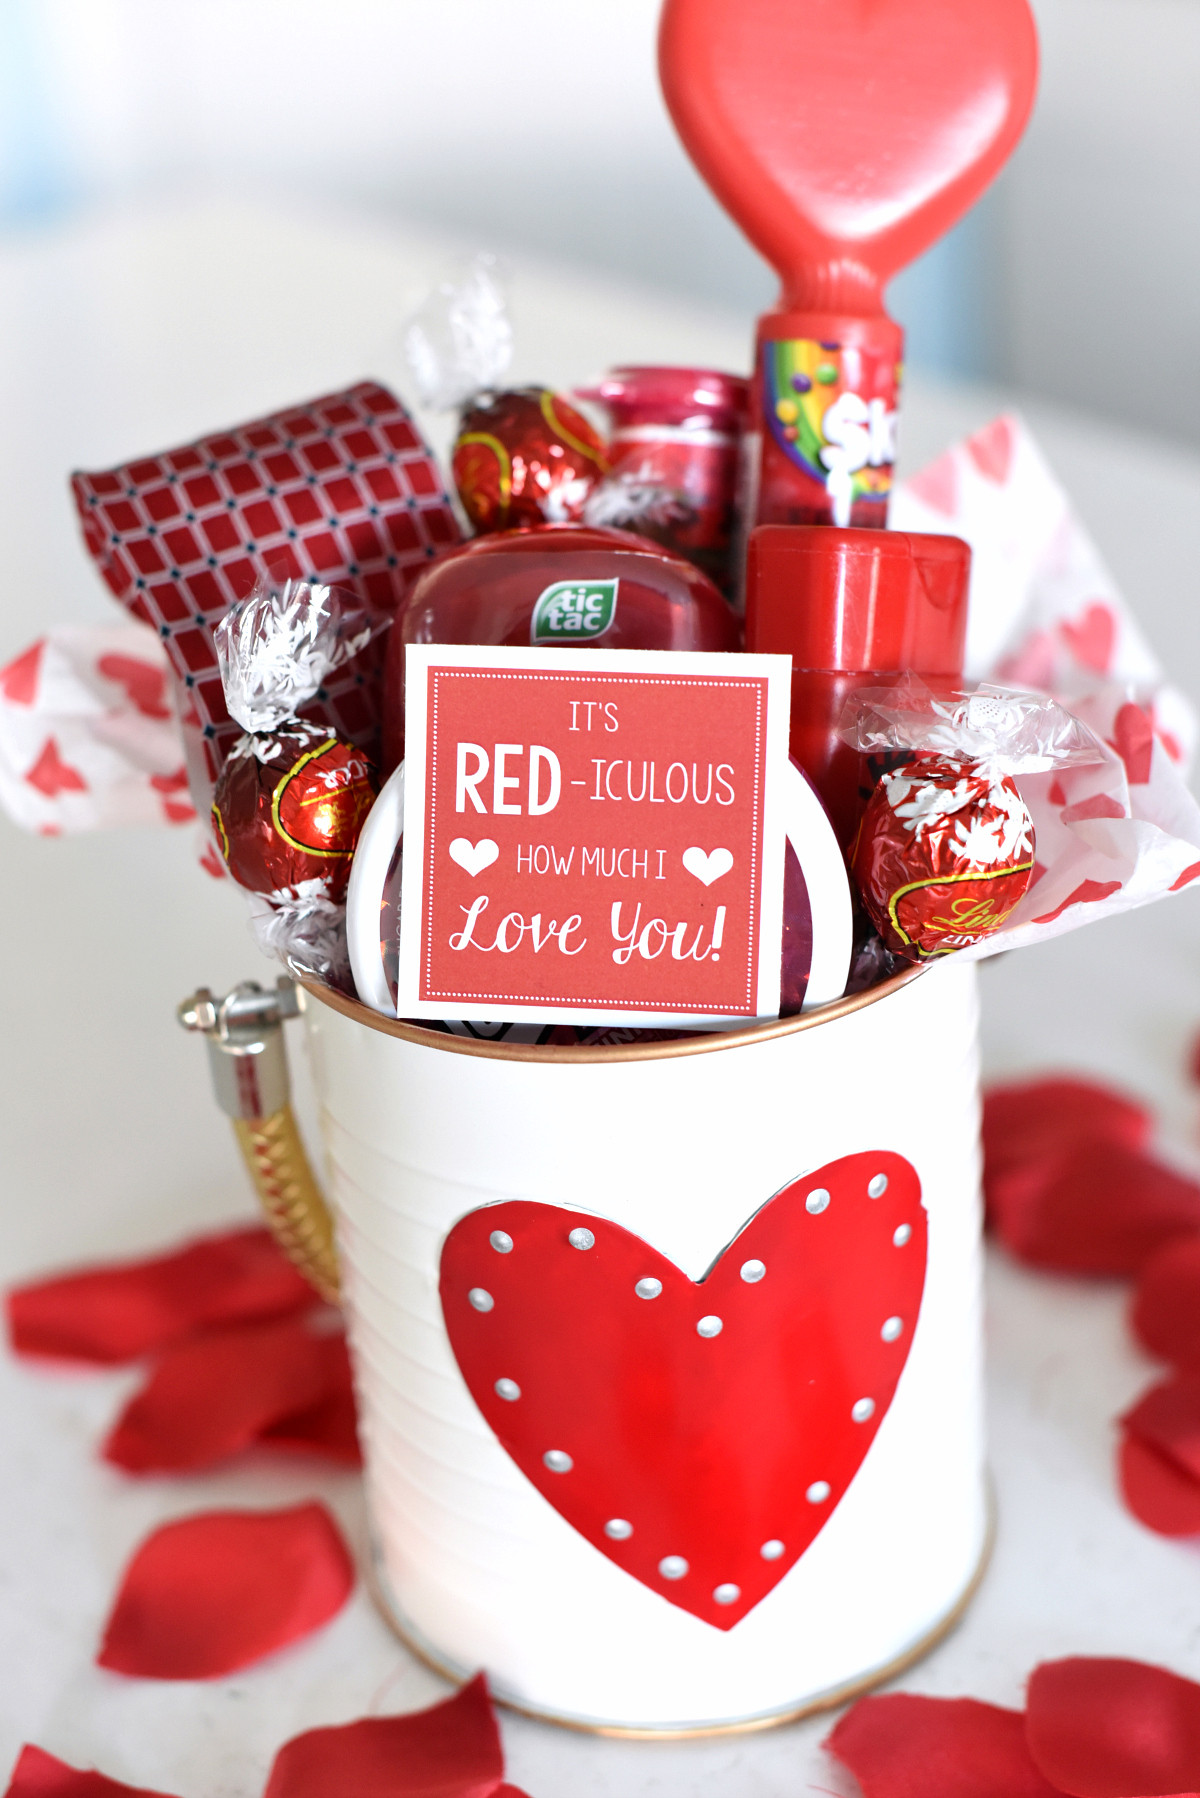 Creative Valentines Day Ideas For Her
 25 DIY Valentine s Day Gift Ideas Teens Will Love